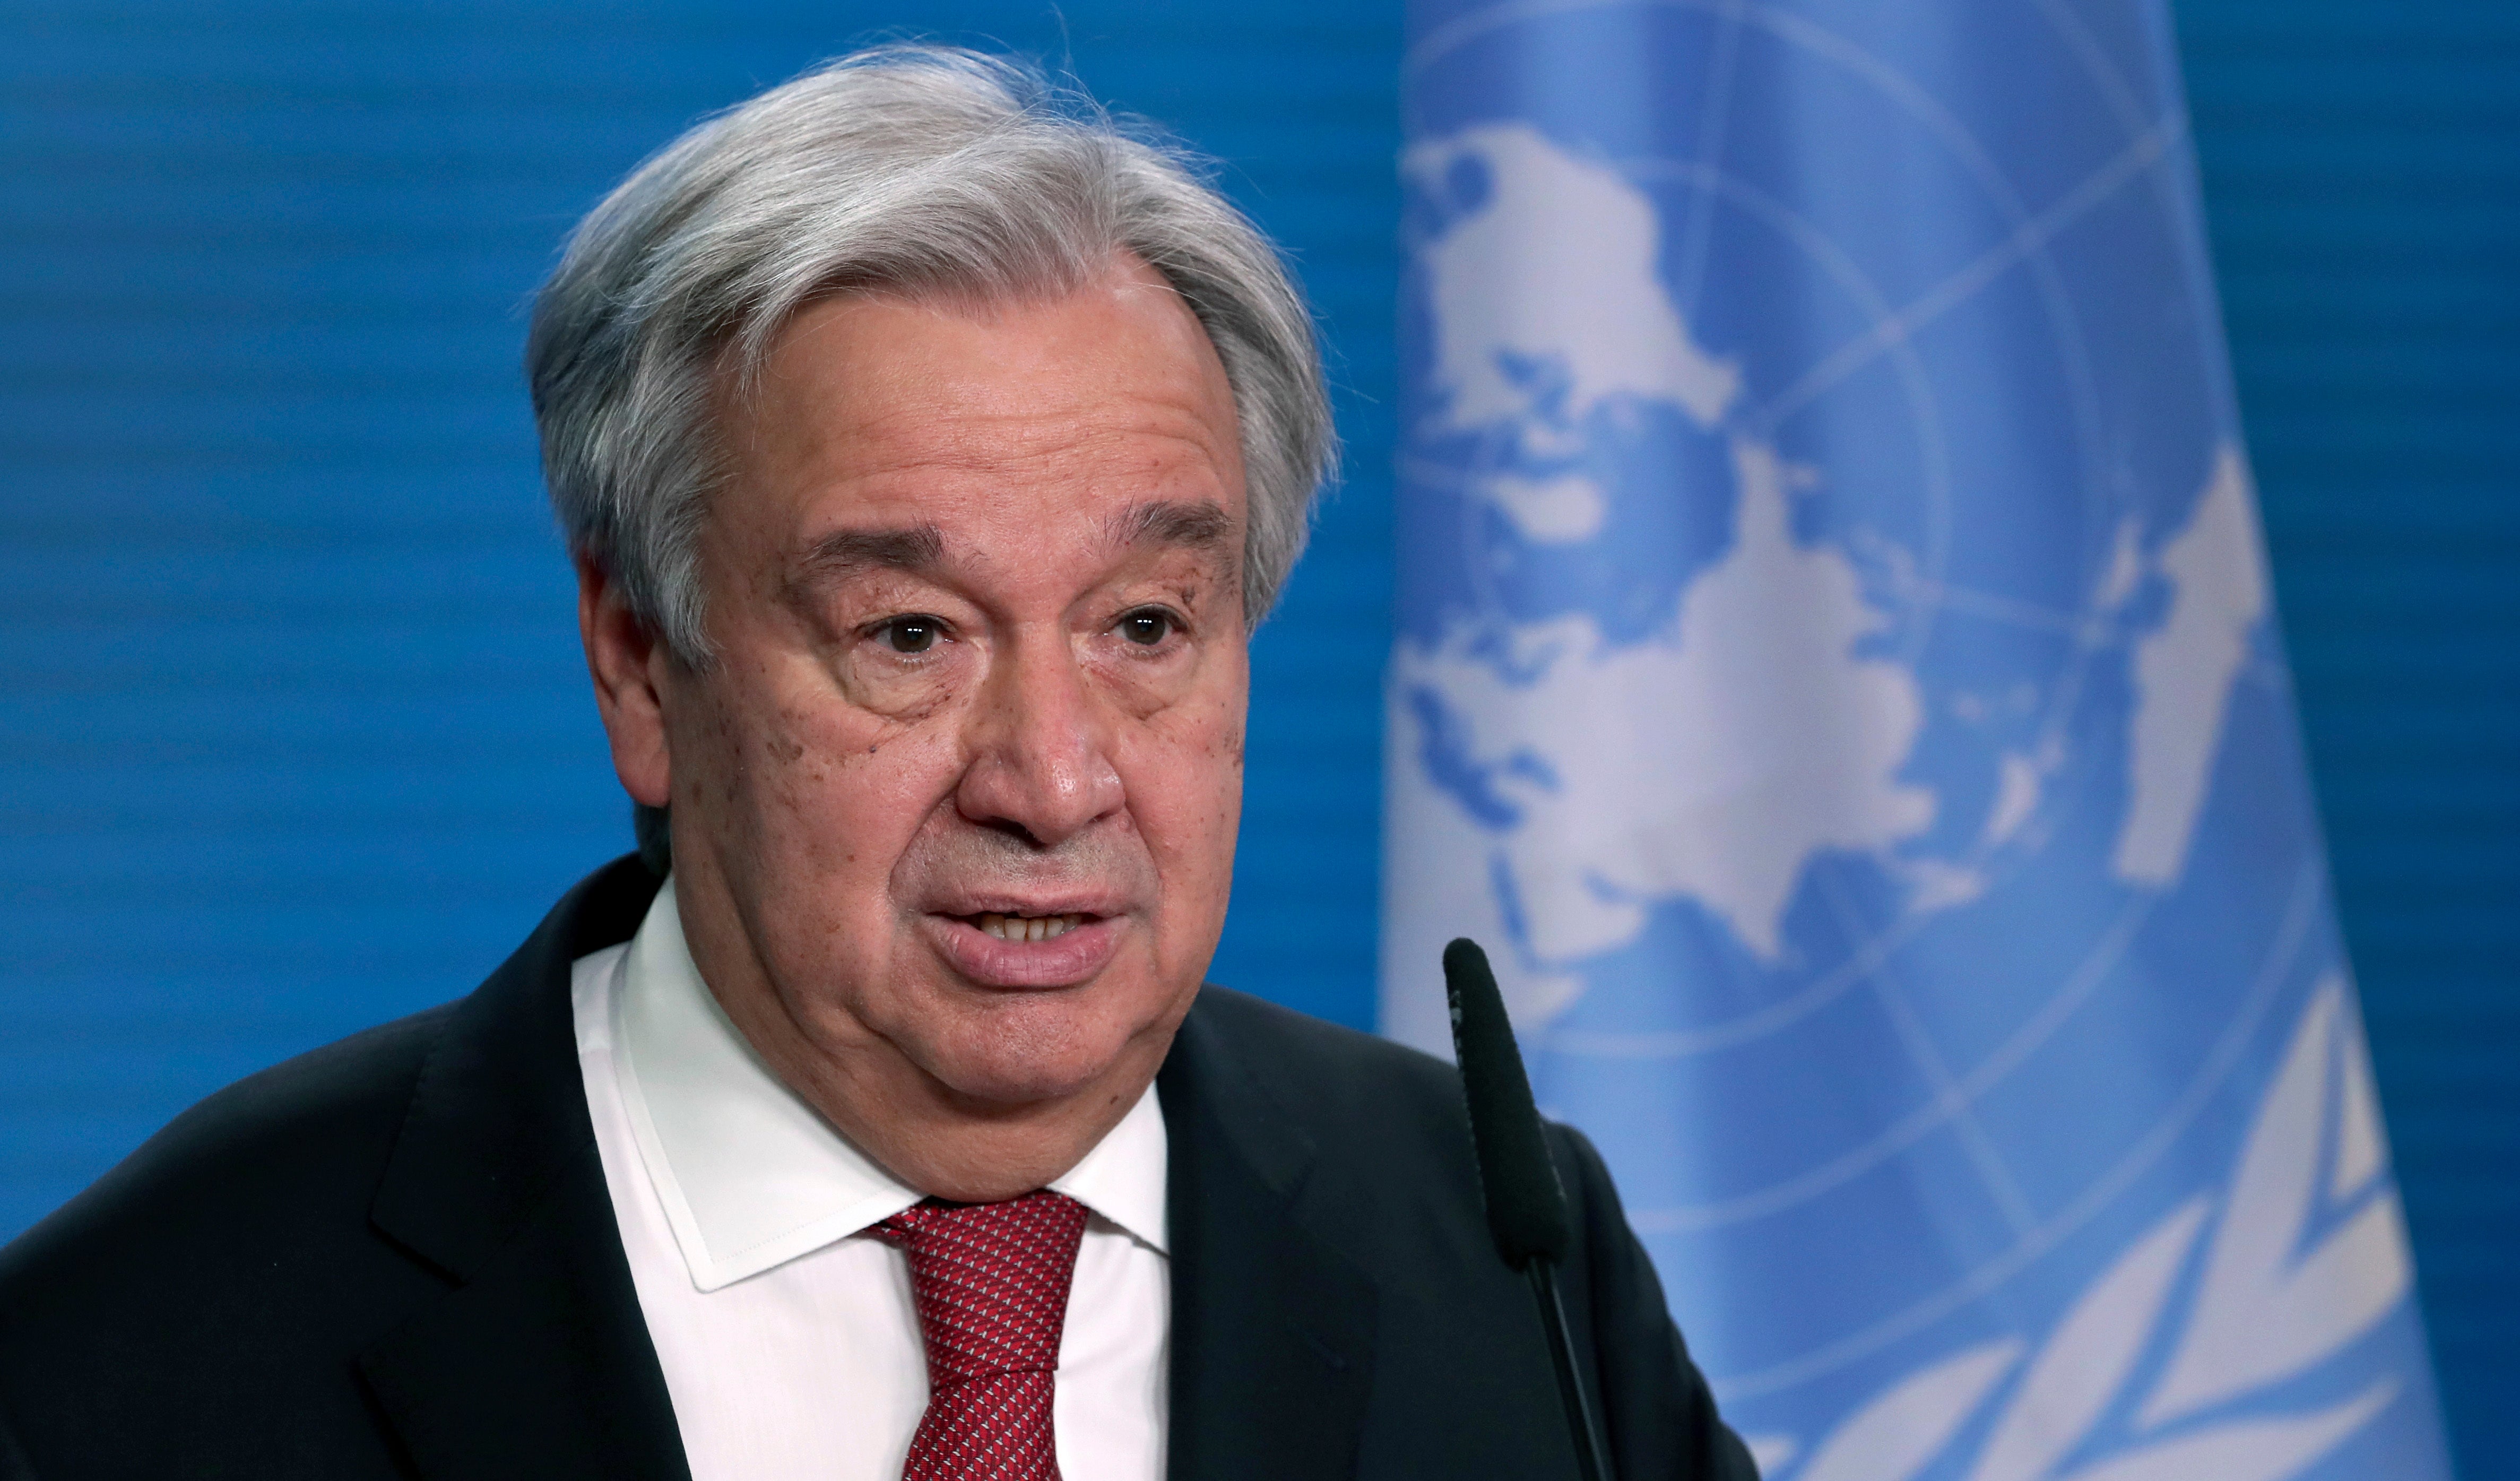 Antonio Guterres said this week the COP26 talks risk failing because of mistrust between rich and poor countries